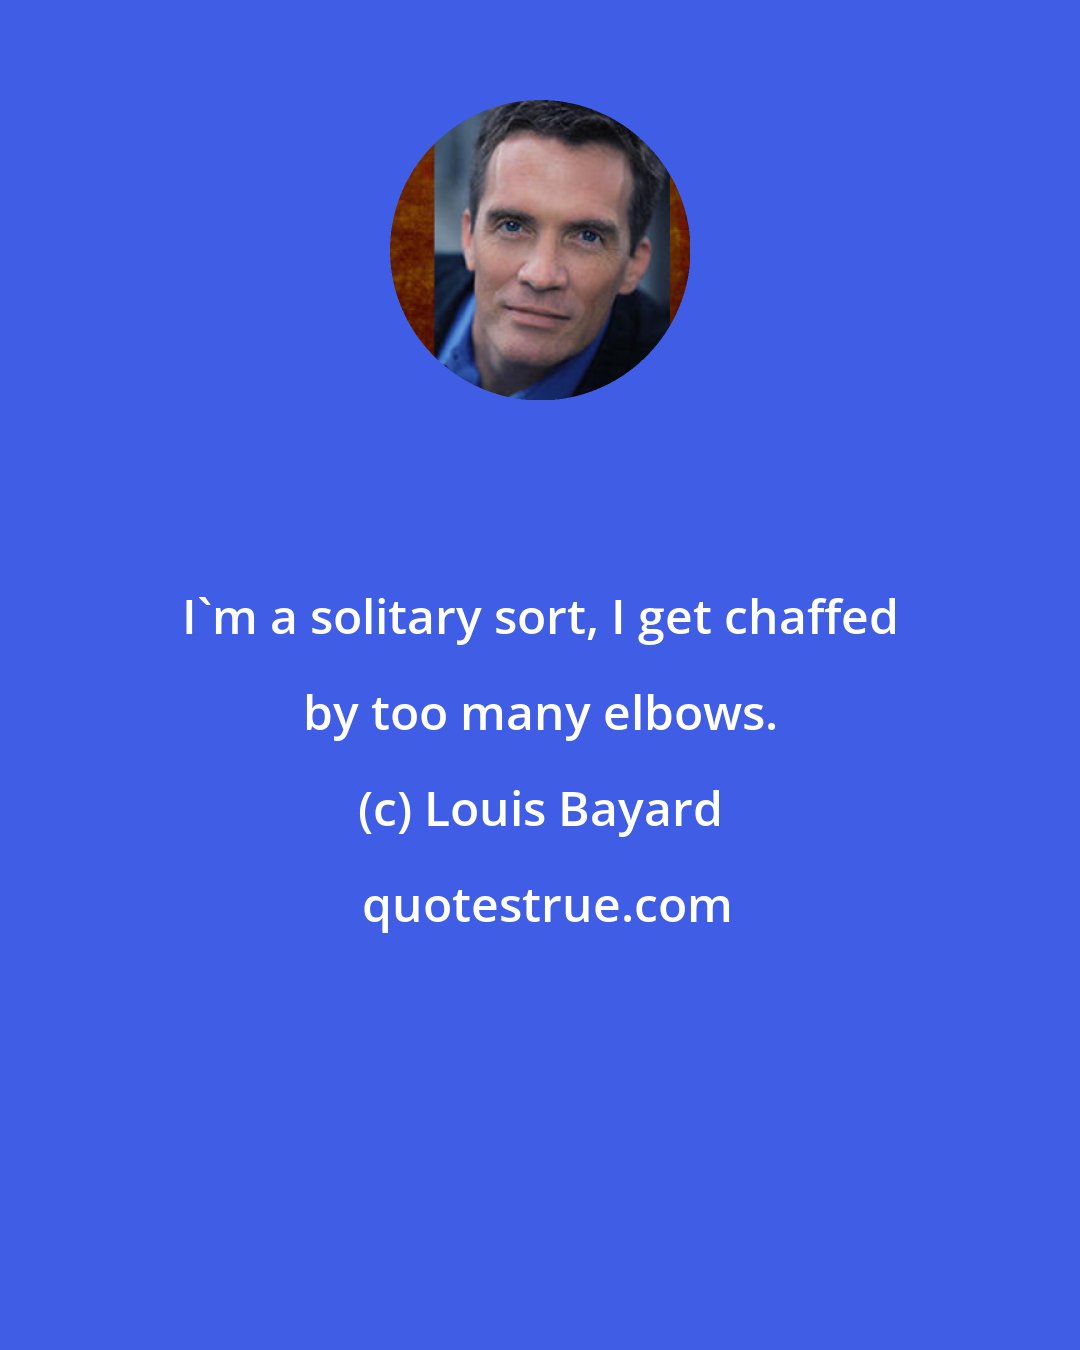 Louis Bayard: I'm a solitary sort, I get chaffed by too many elbows.